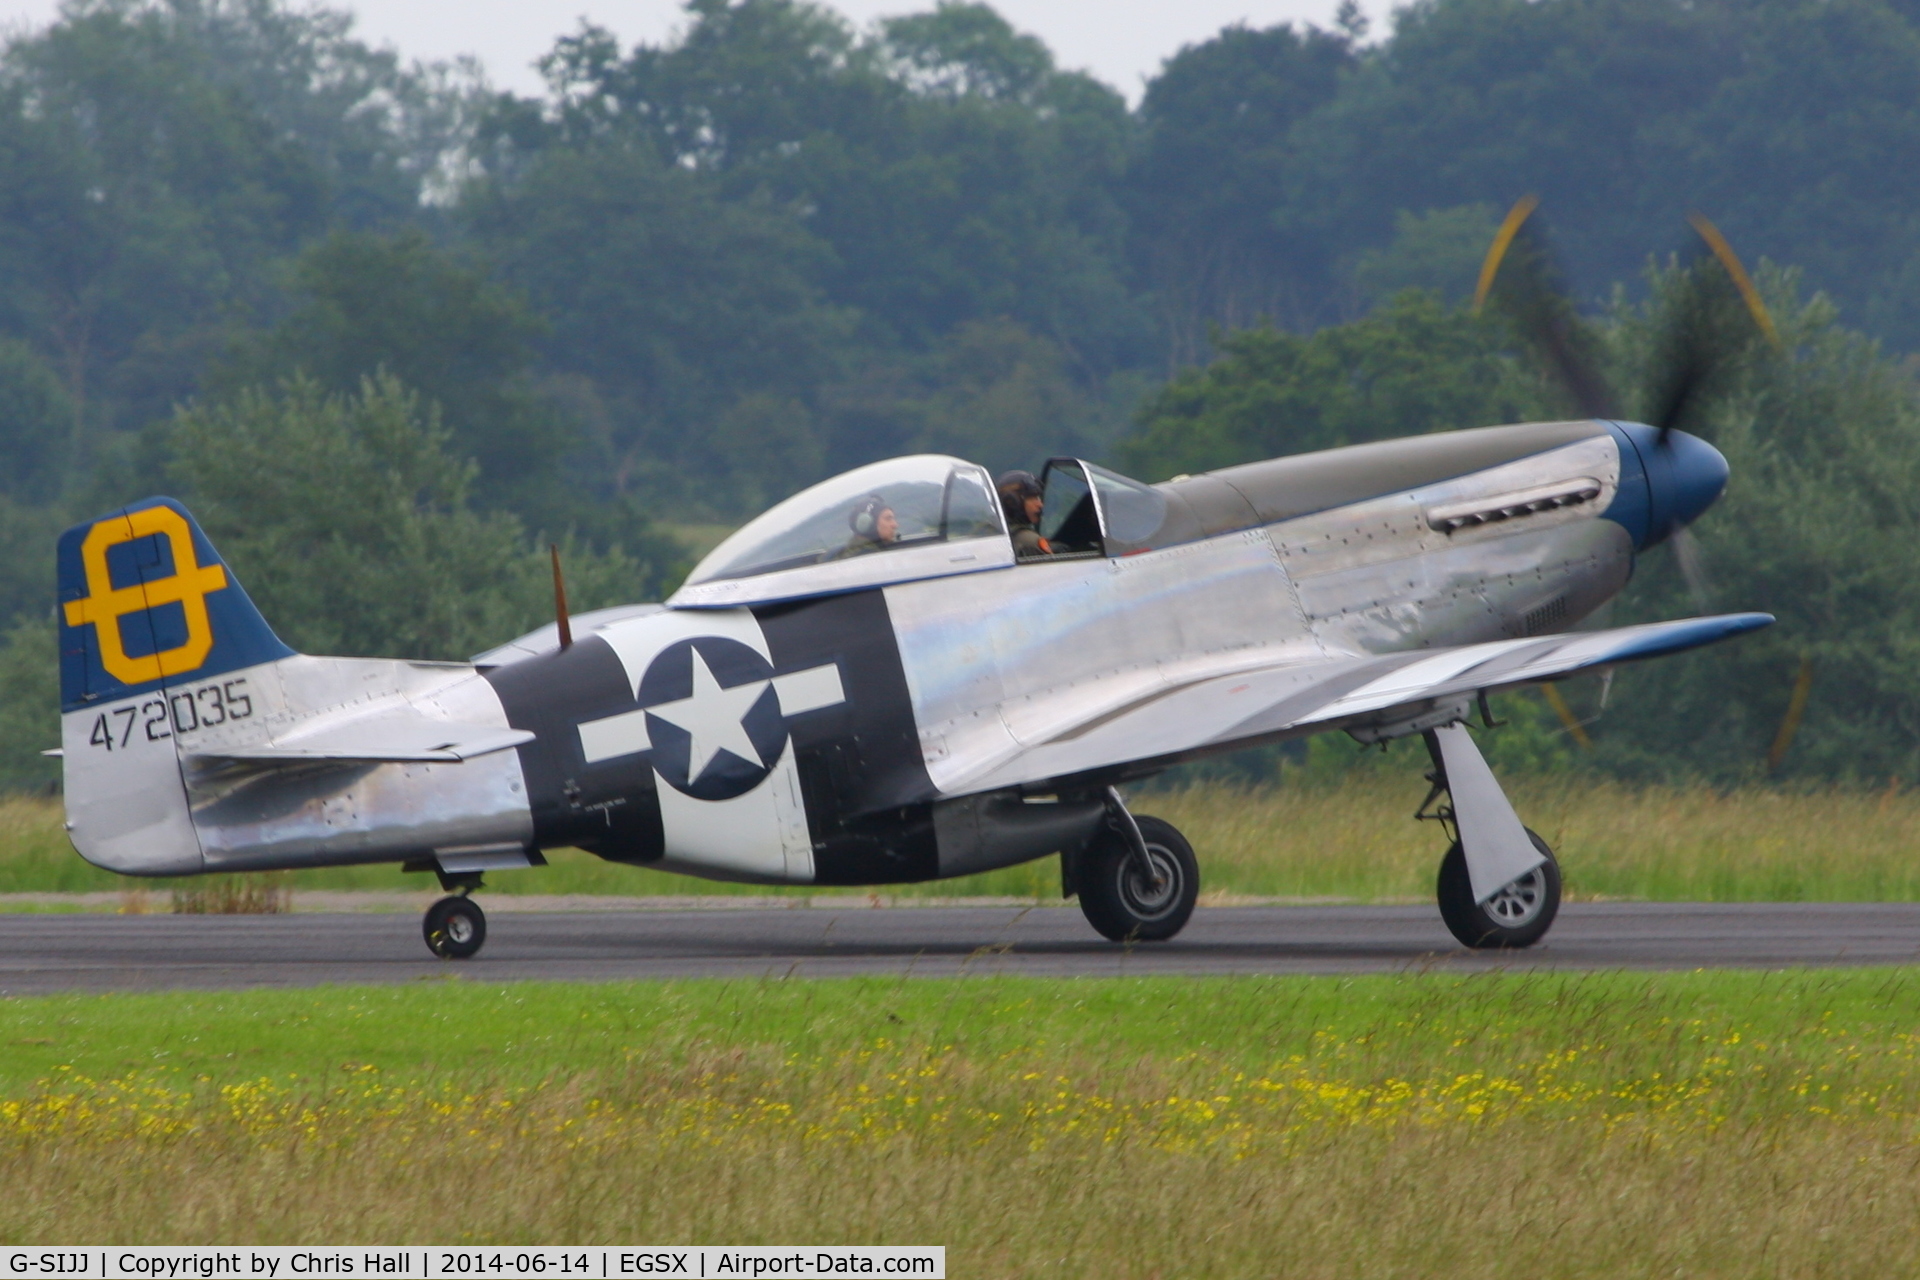 G-SIJJ, 1944 North American P-51D Mustang C/N 122-31894 (44-72035), at the Air Britain fly in